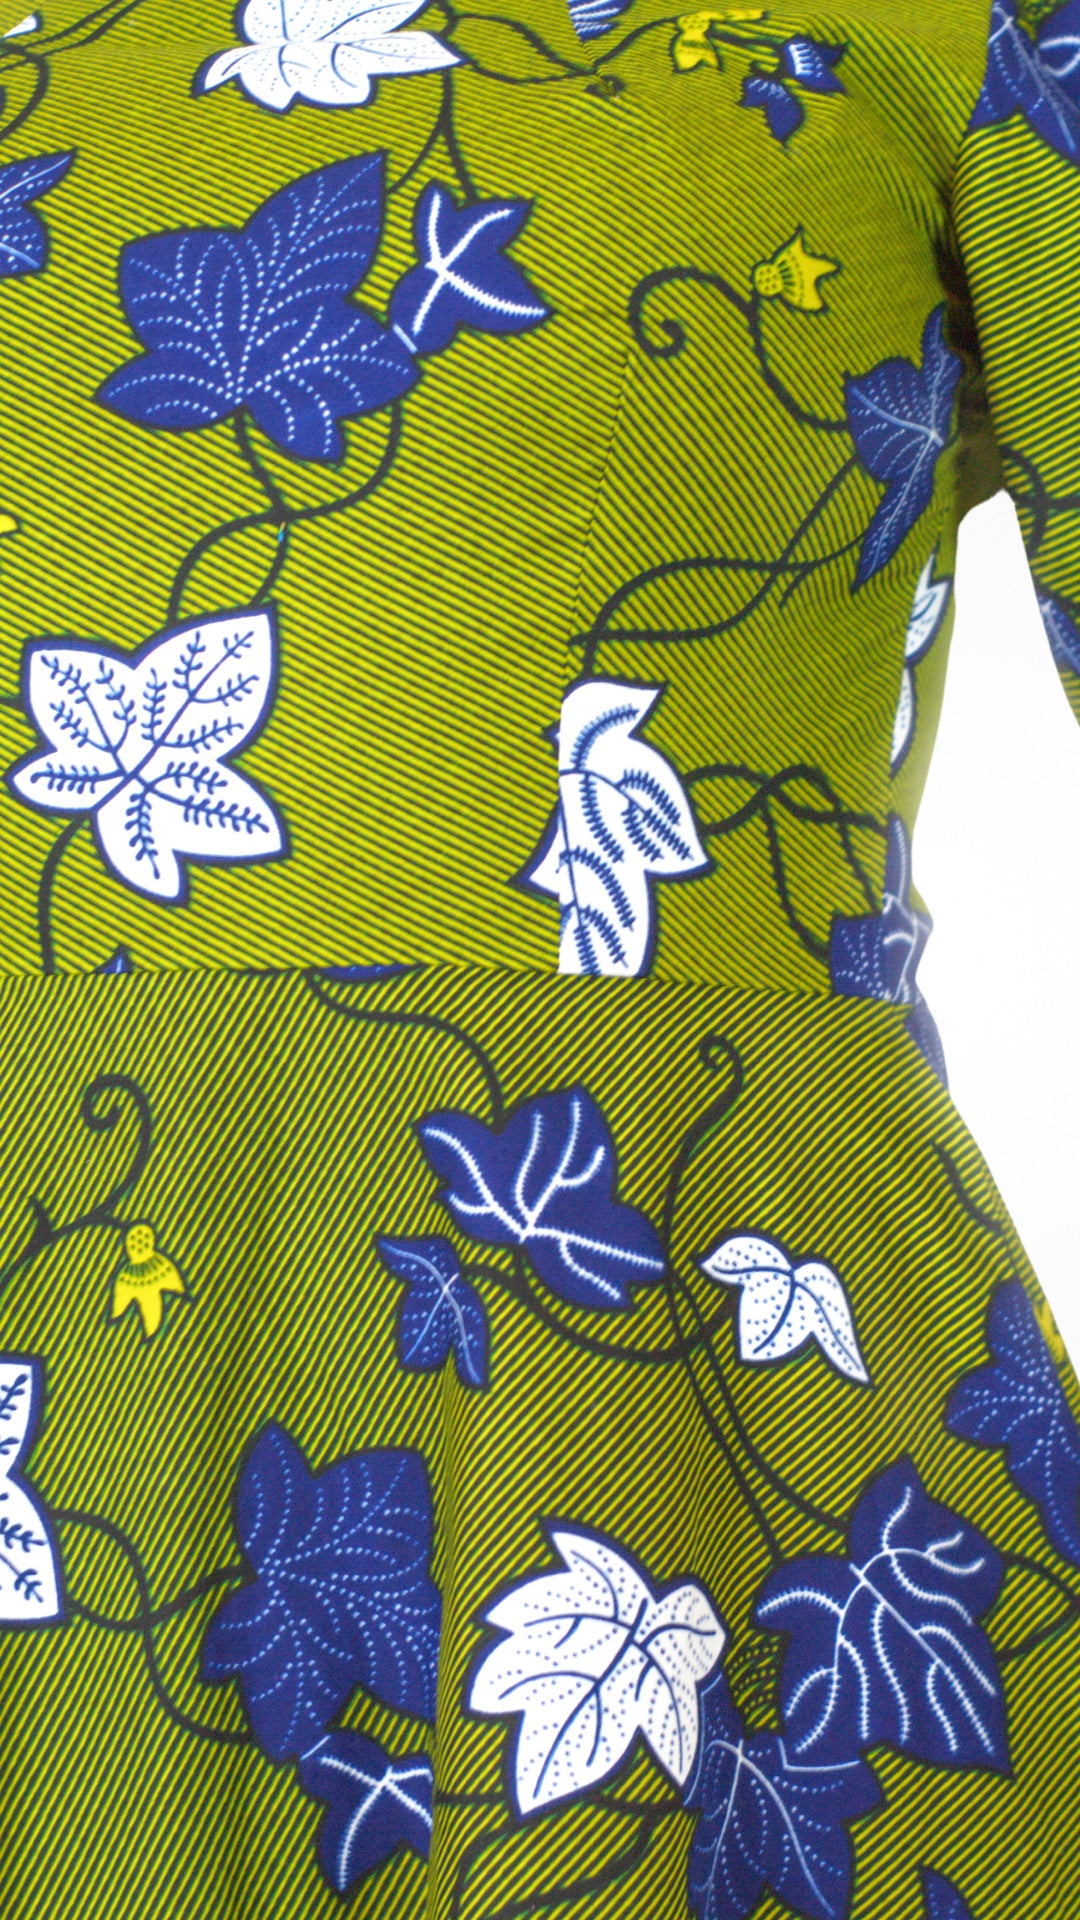 A close up of the waistline and detailed white and blue leafy elements of the khaki dress.